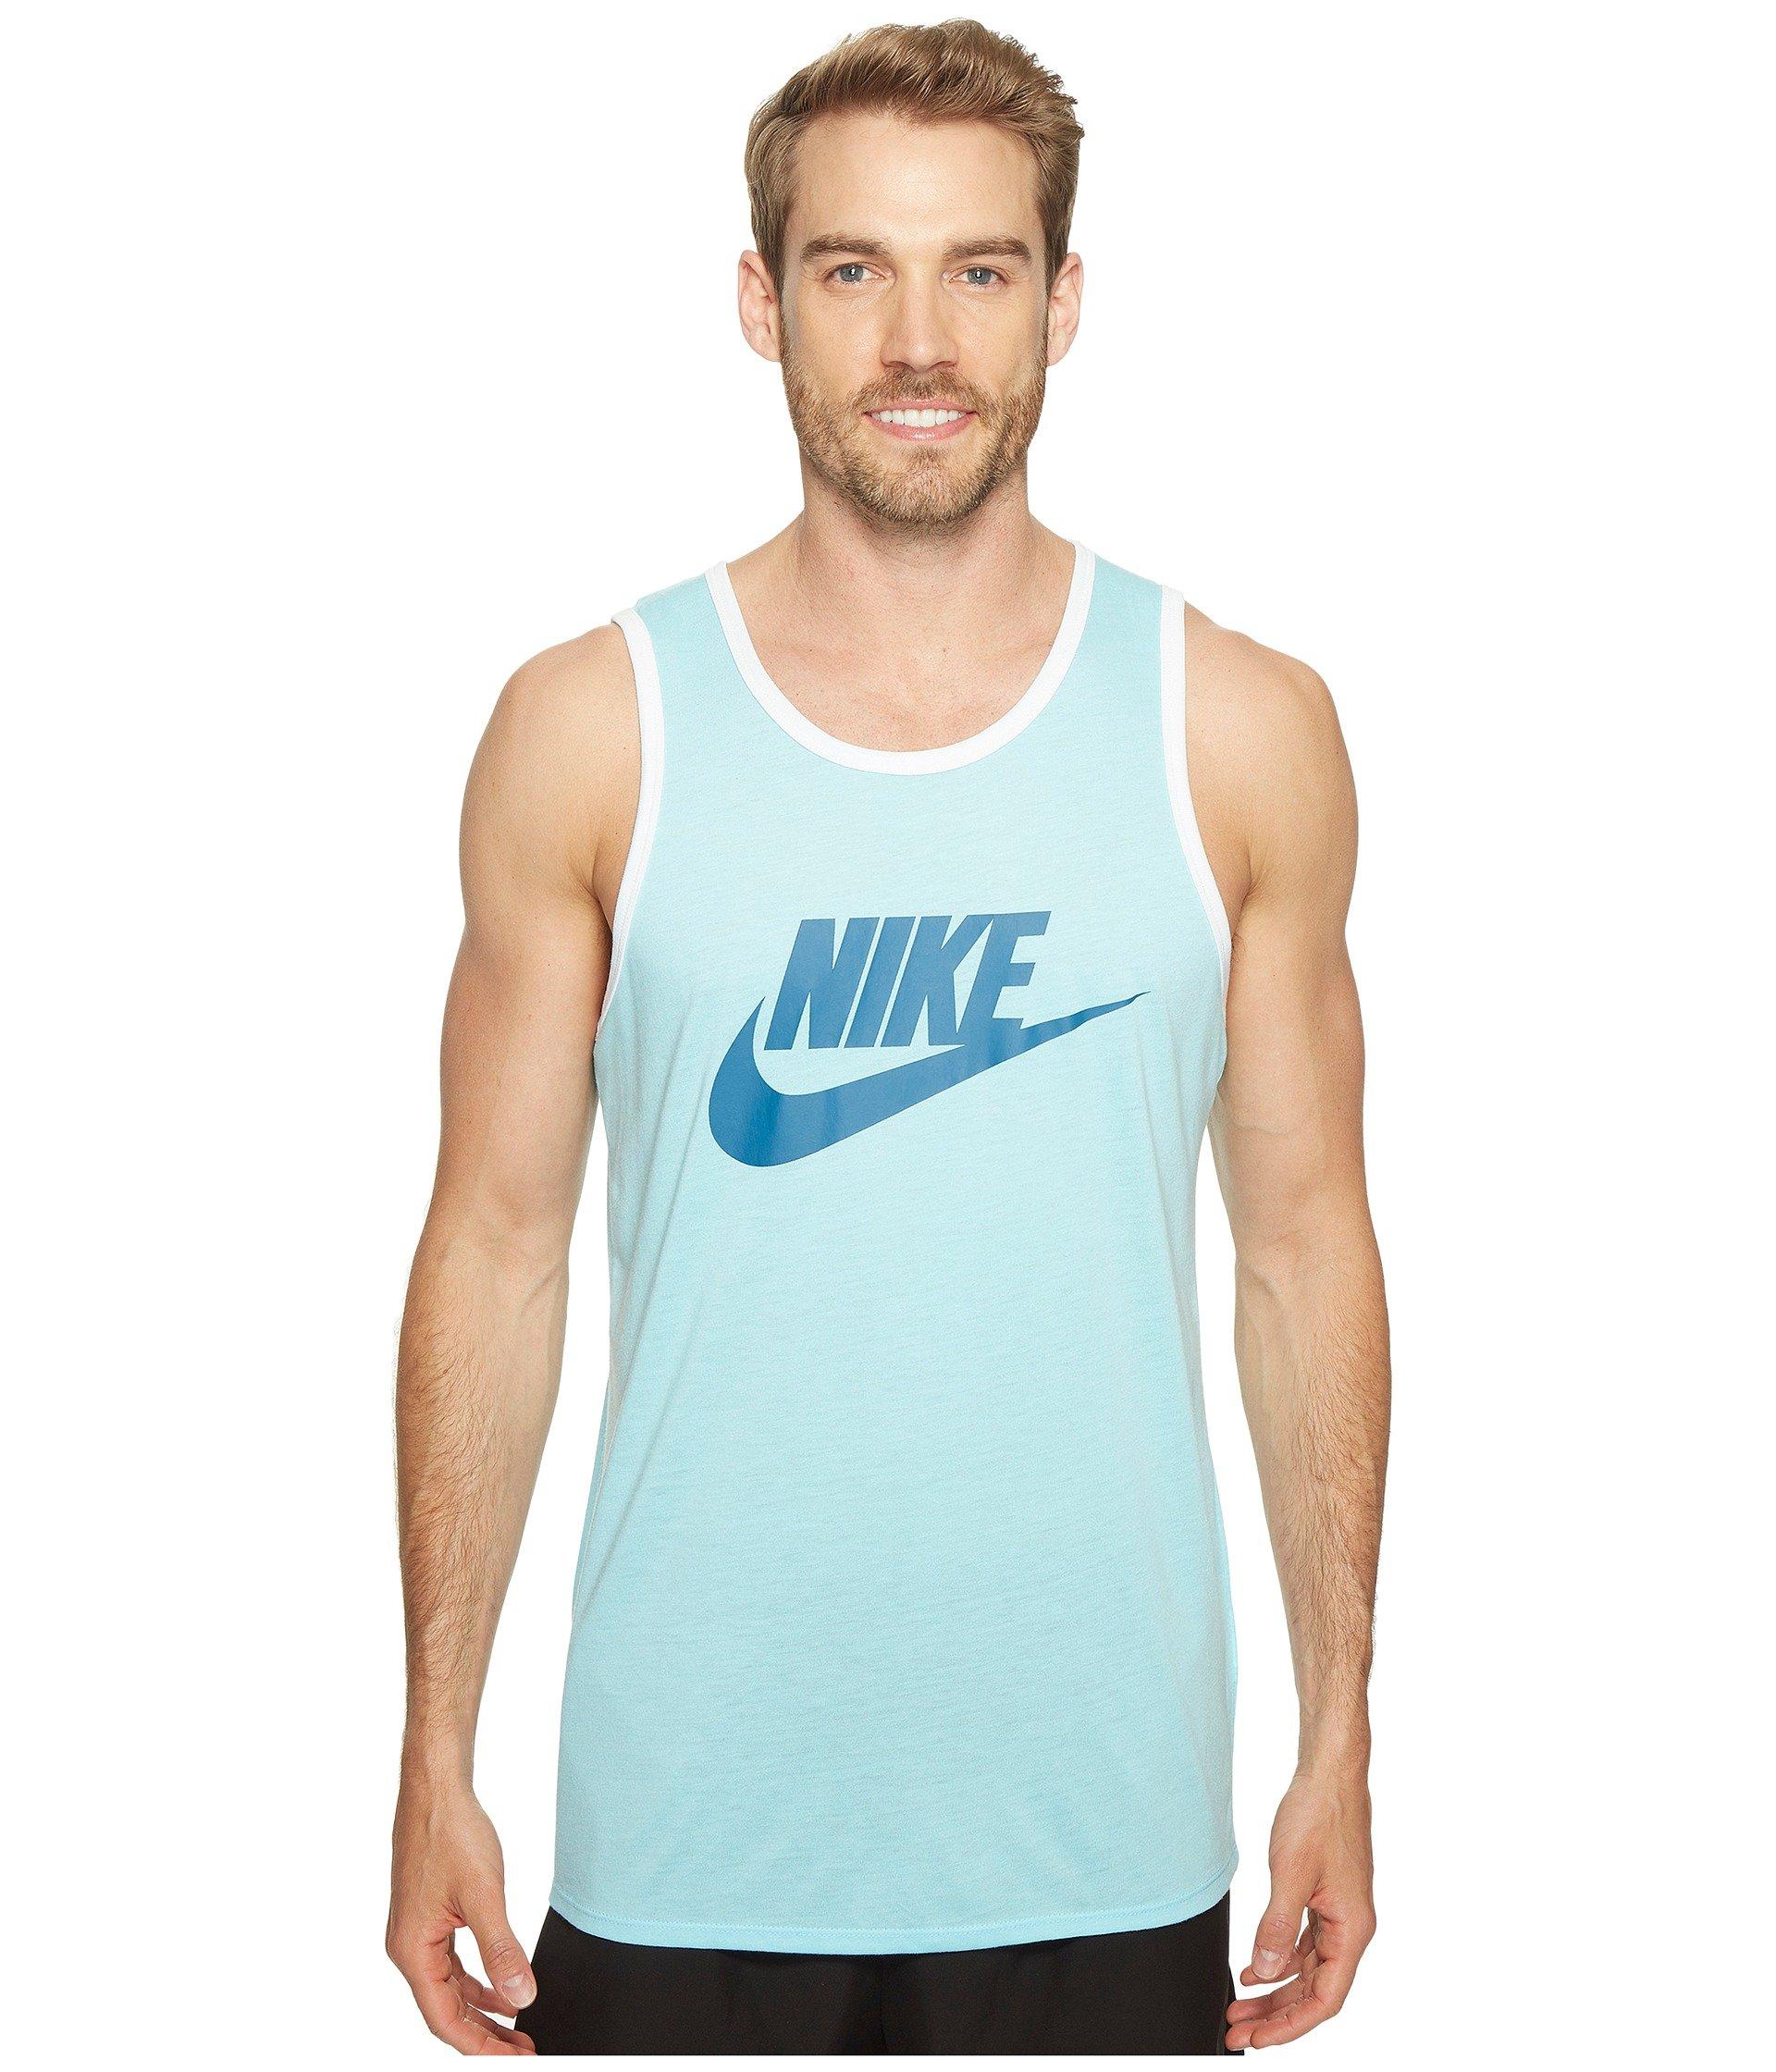 nike ace tank top - Online Discount Shop for Electronics, Apparel, Toys,  Books, Games, Computers, Shoes, Jewelry, Watches, Baby Products, Sports &  Outdoors, Office Products, Bed & Bath, Furniture, Tools, Hardware,  Automotive